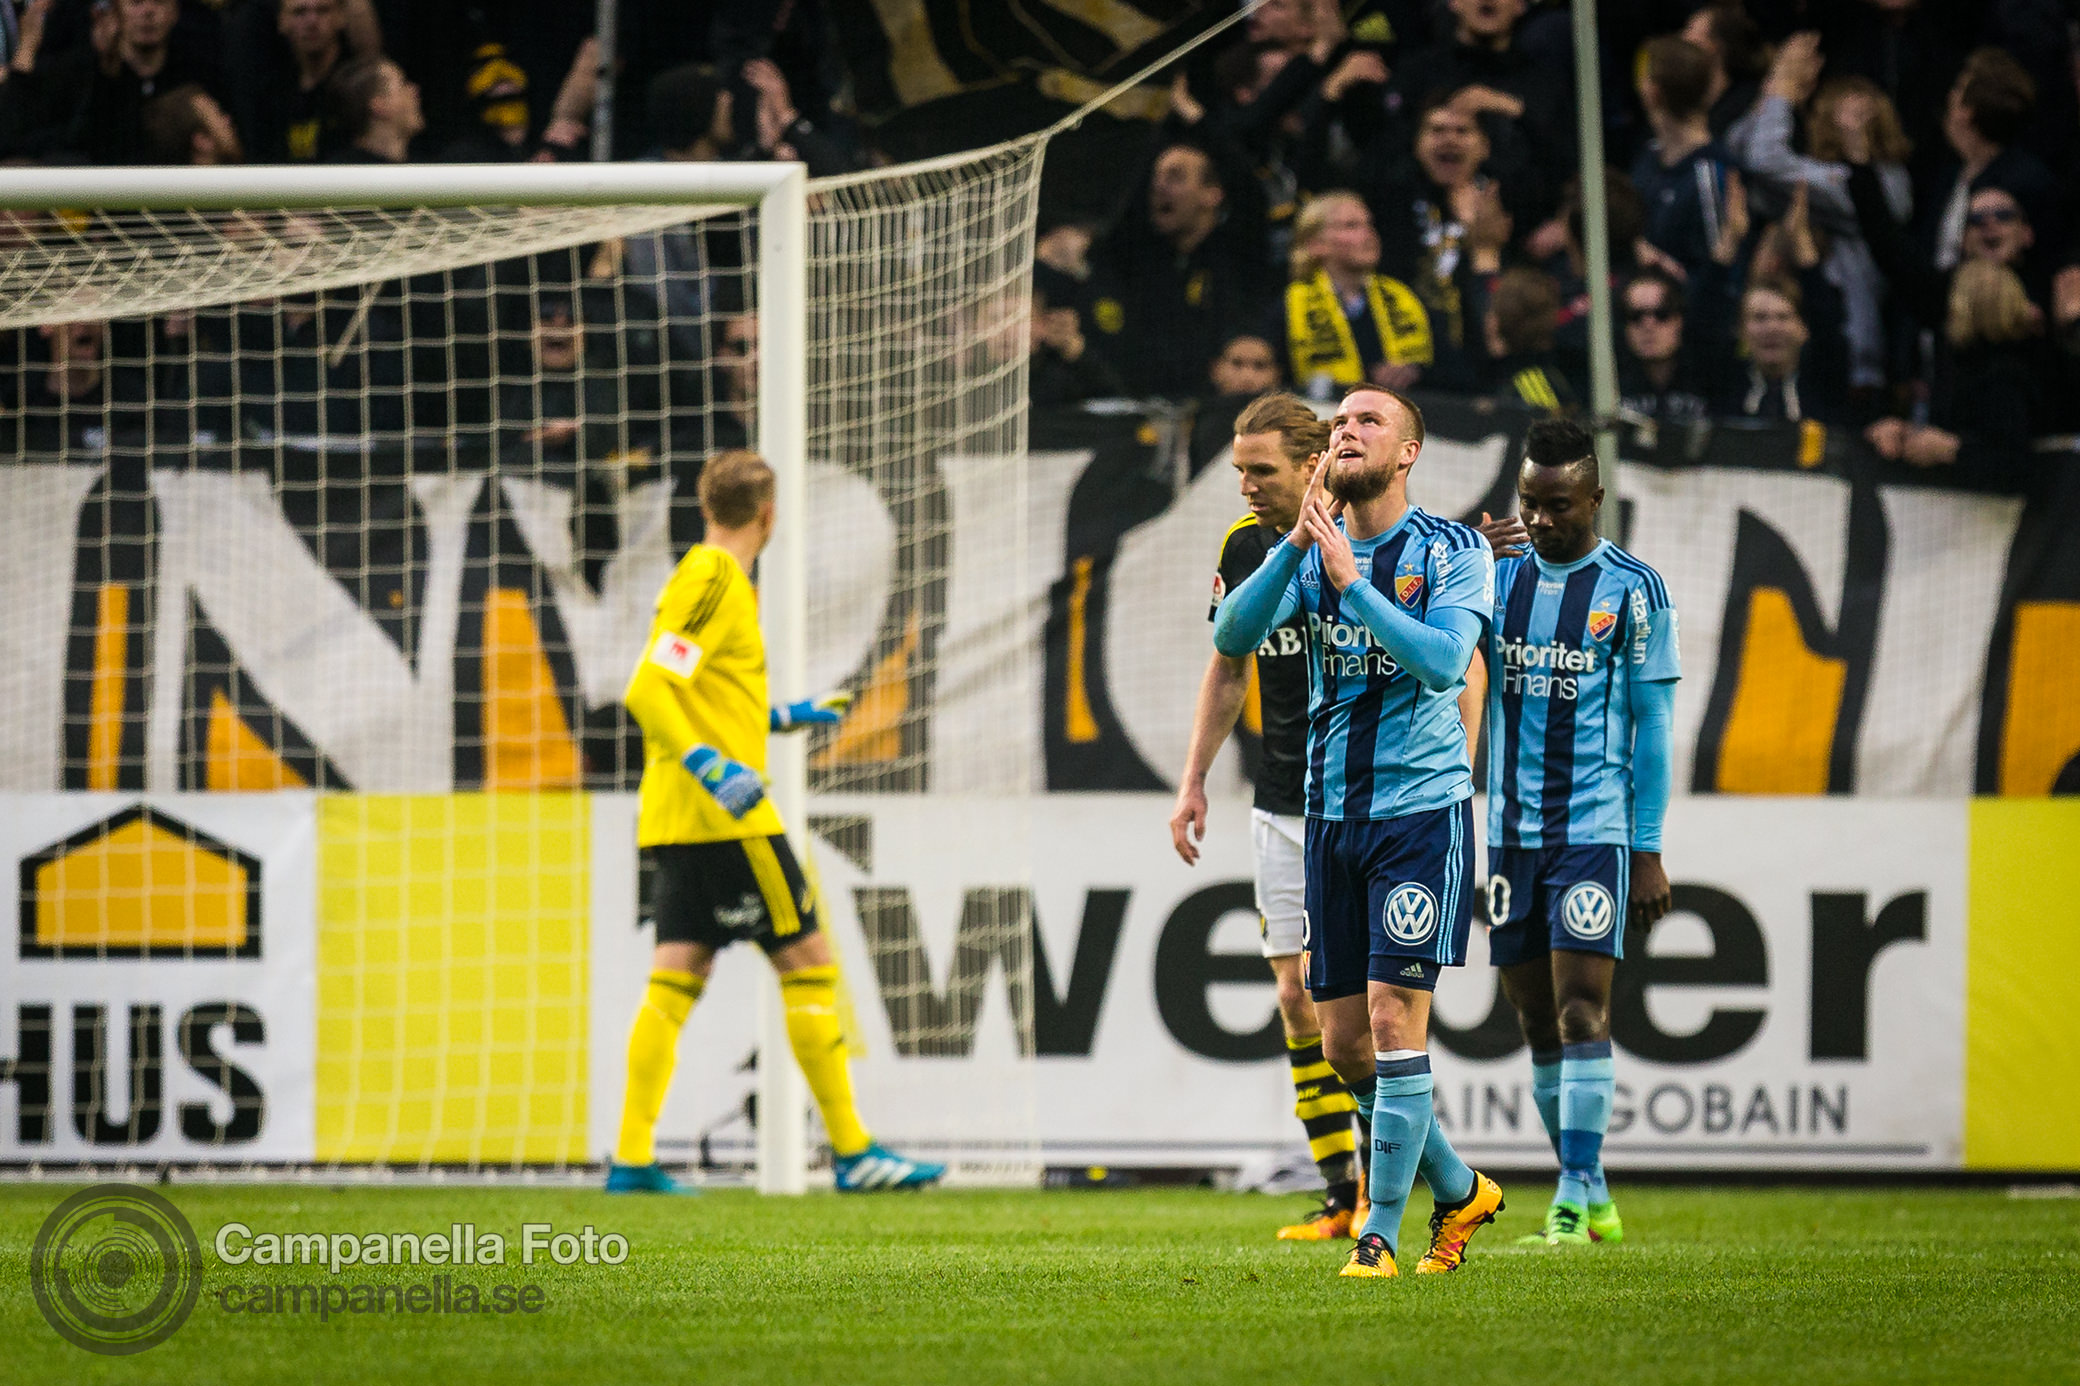 AIK crushes Djurgården and claims the derby - Michael Campanella Photography